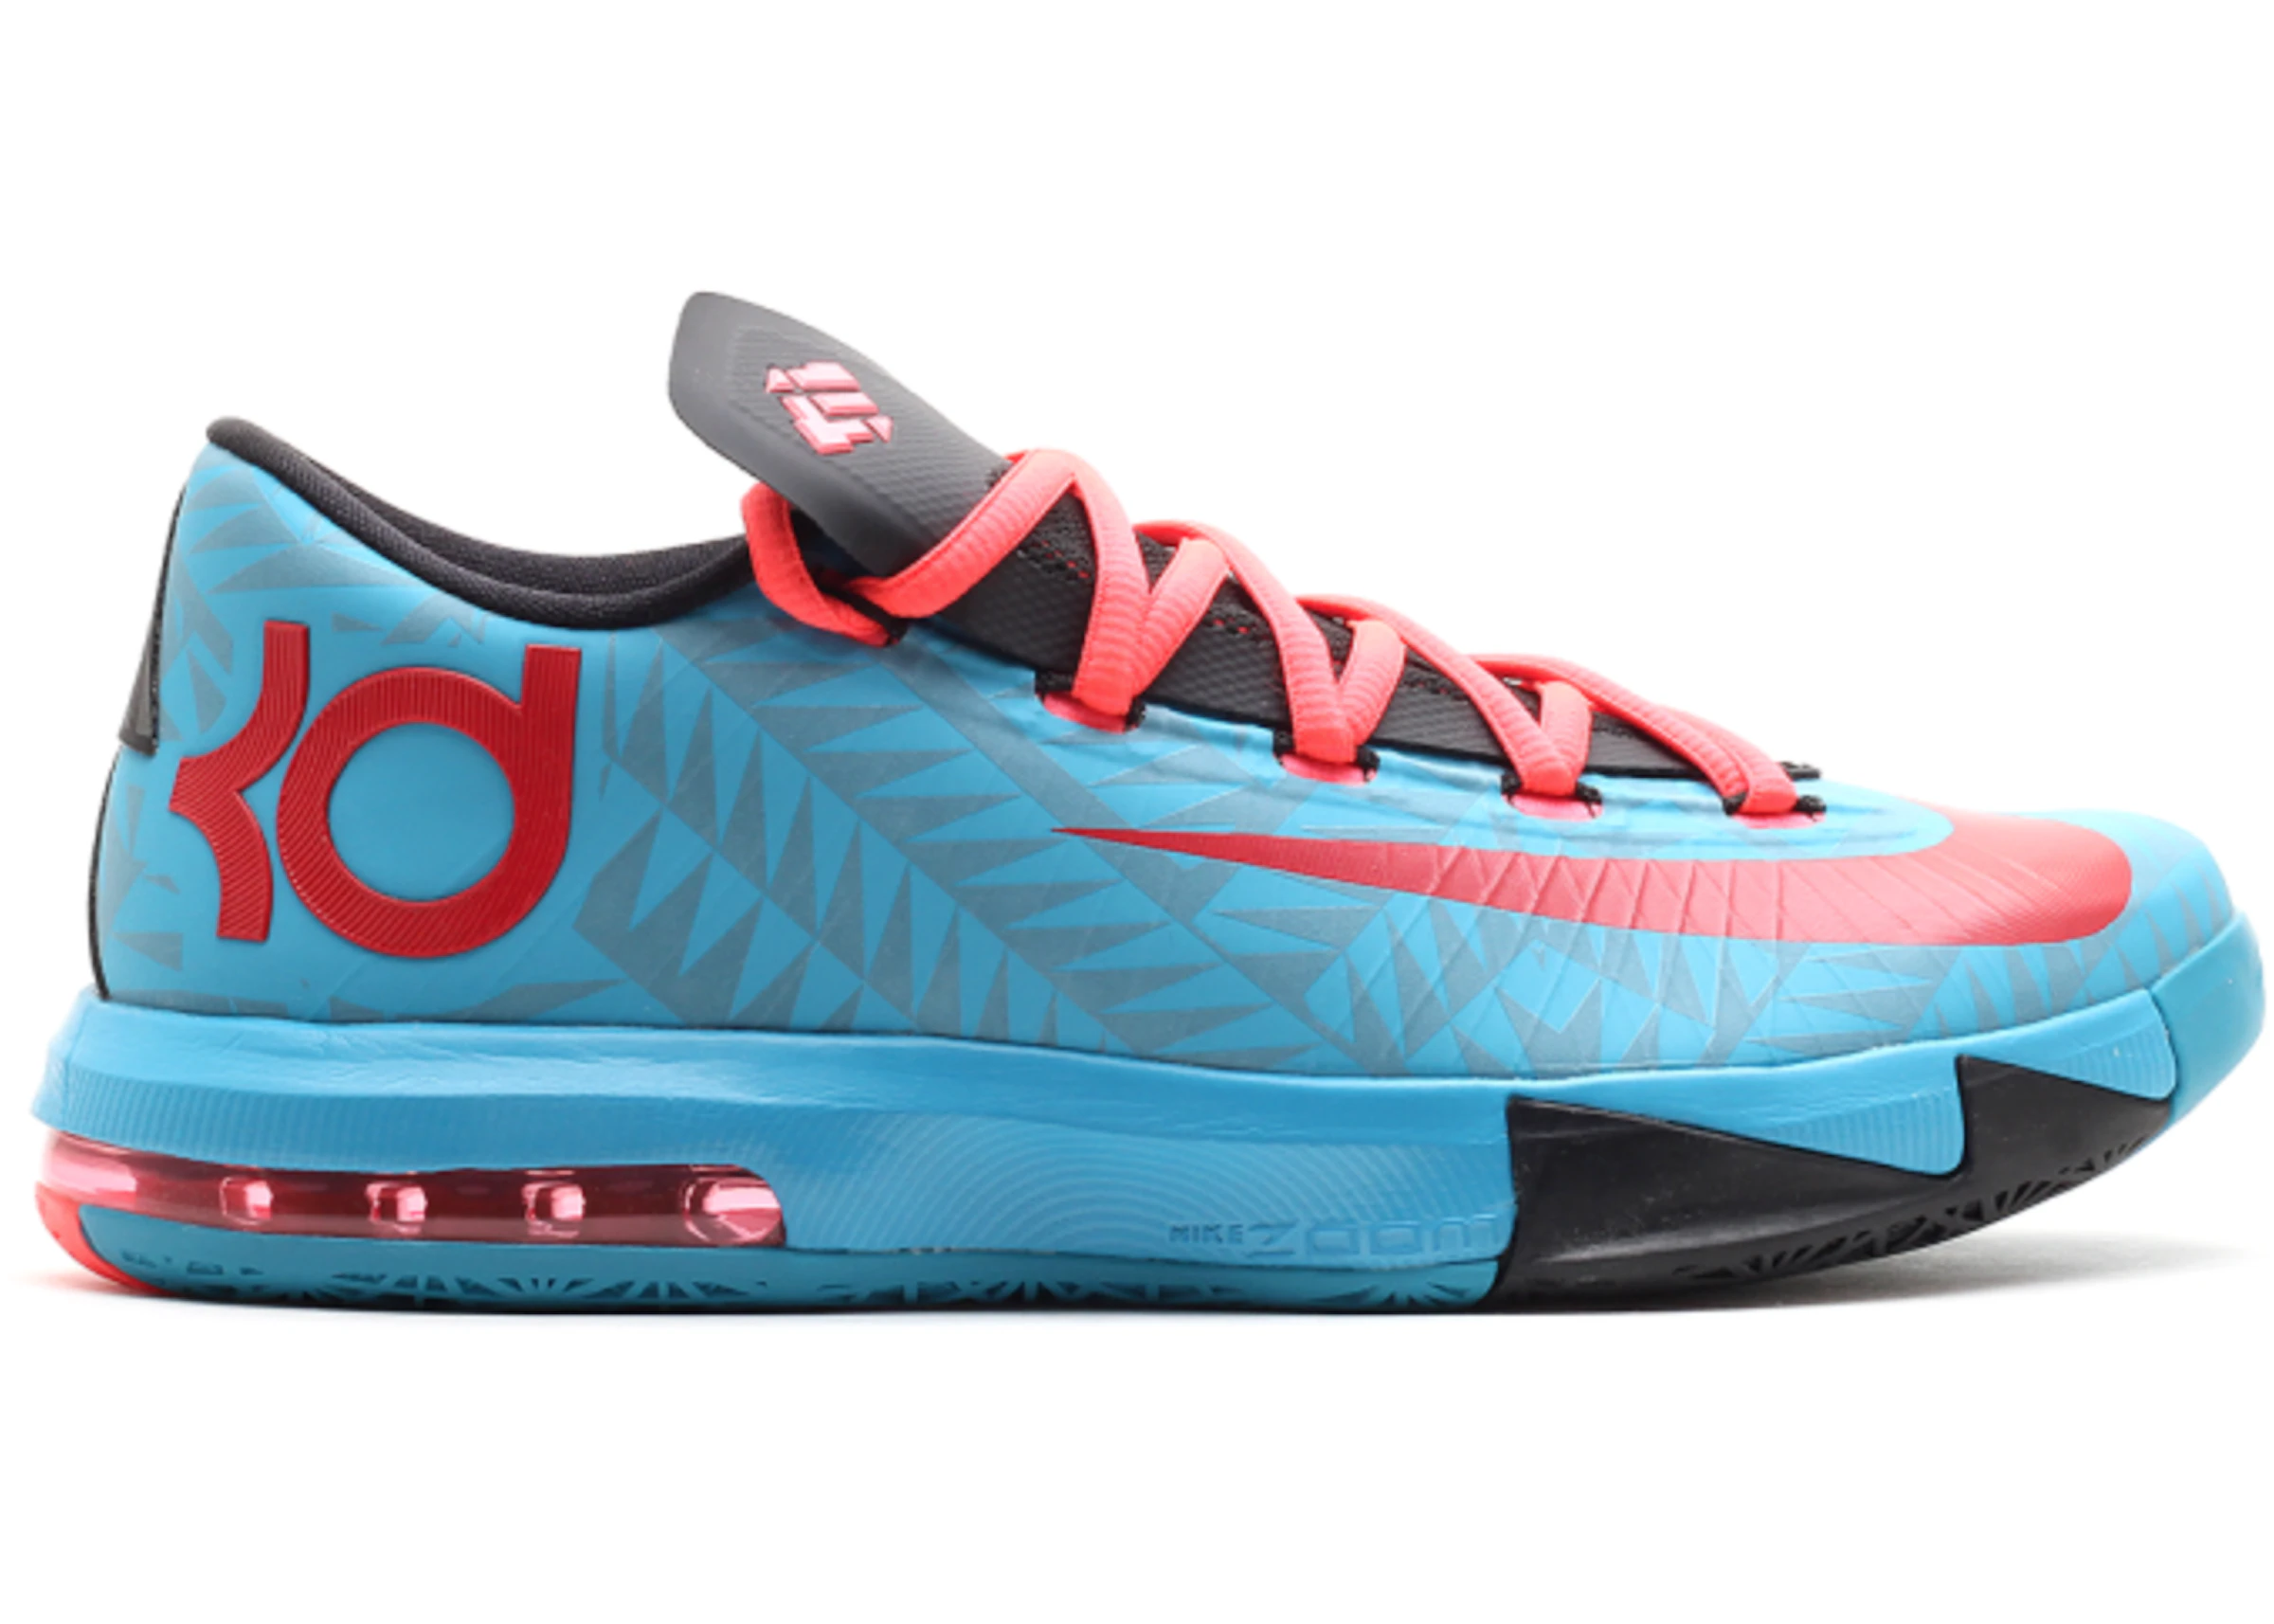 Buy Nike kd 6 orange and black KD 6 Shoes & New Sneakers - StockX